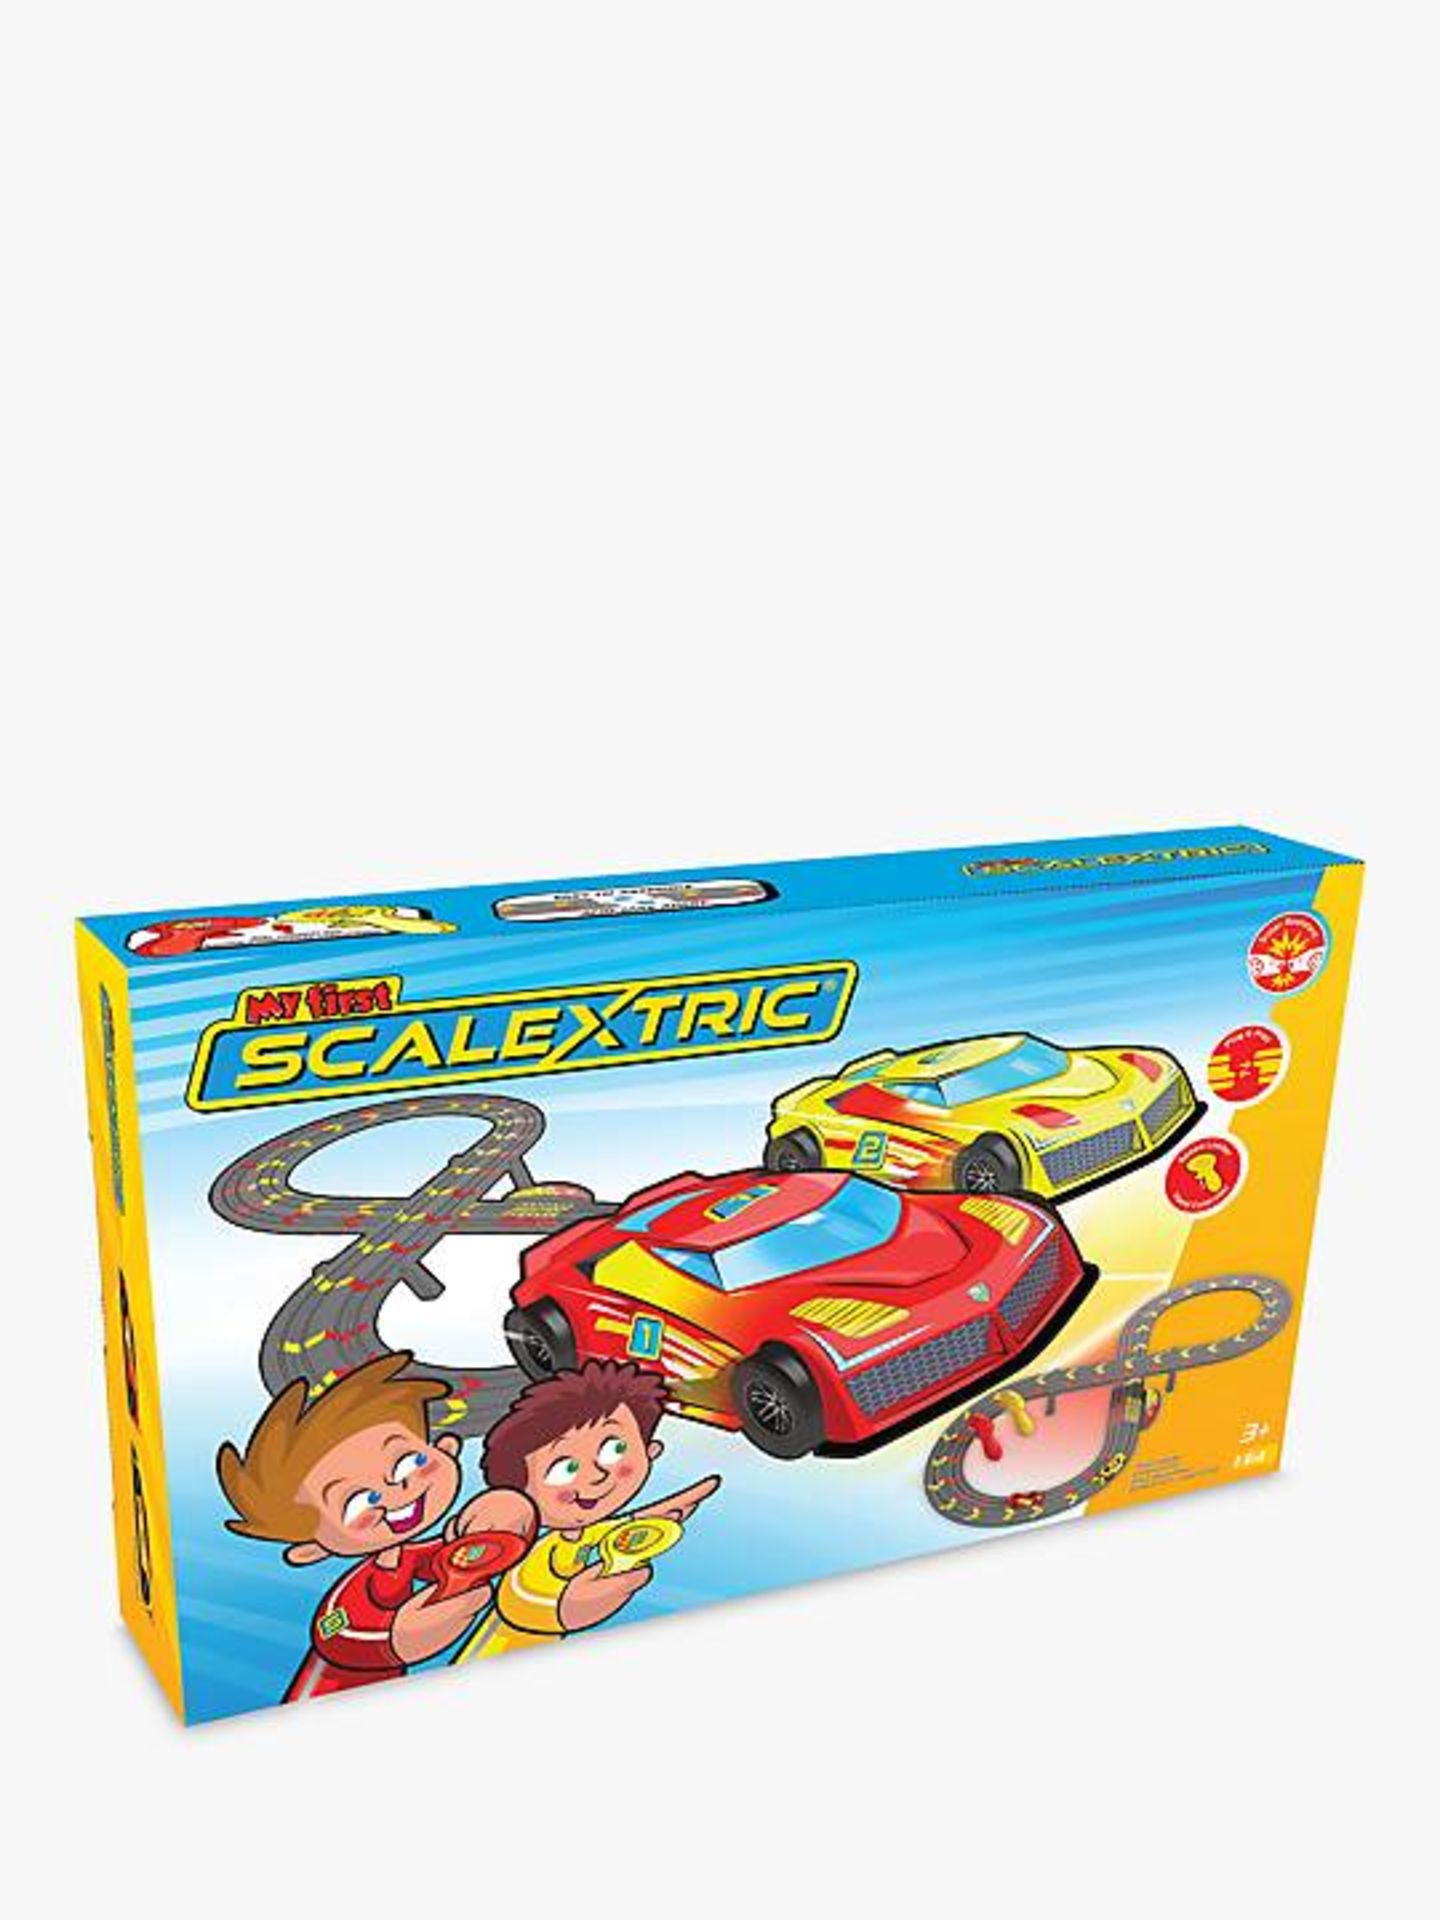 Pallet of Raw Customer Returns - Category - TOYS - P100134207 - Image 32 of 40